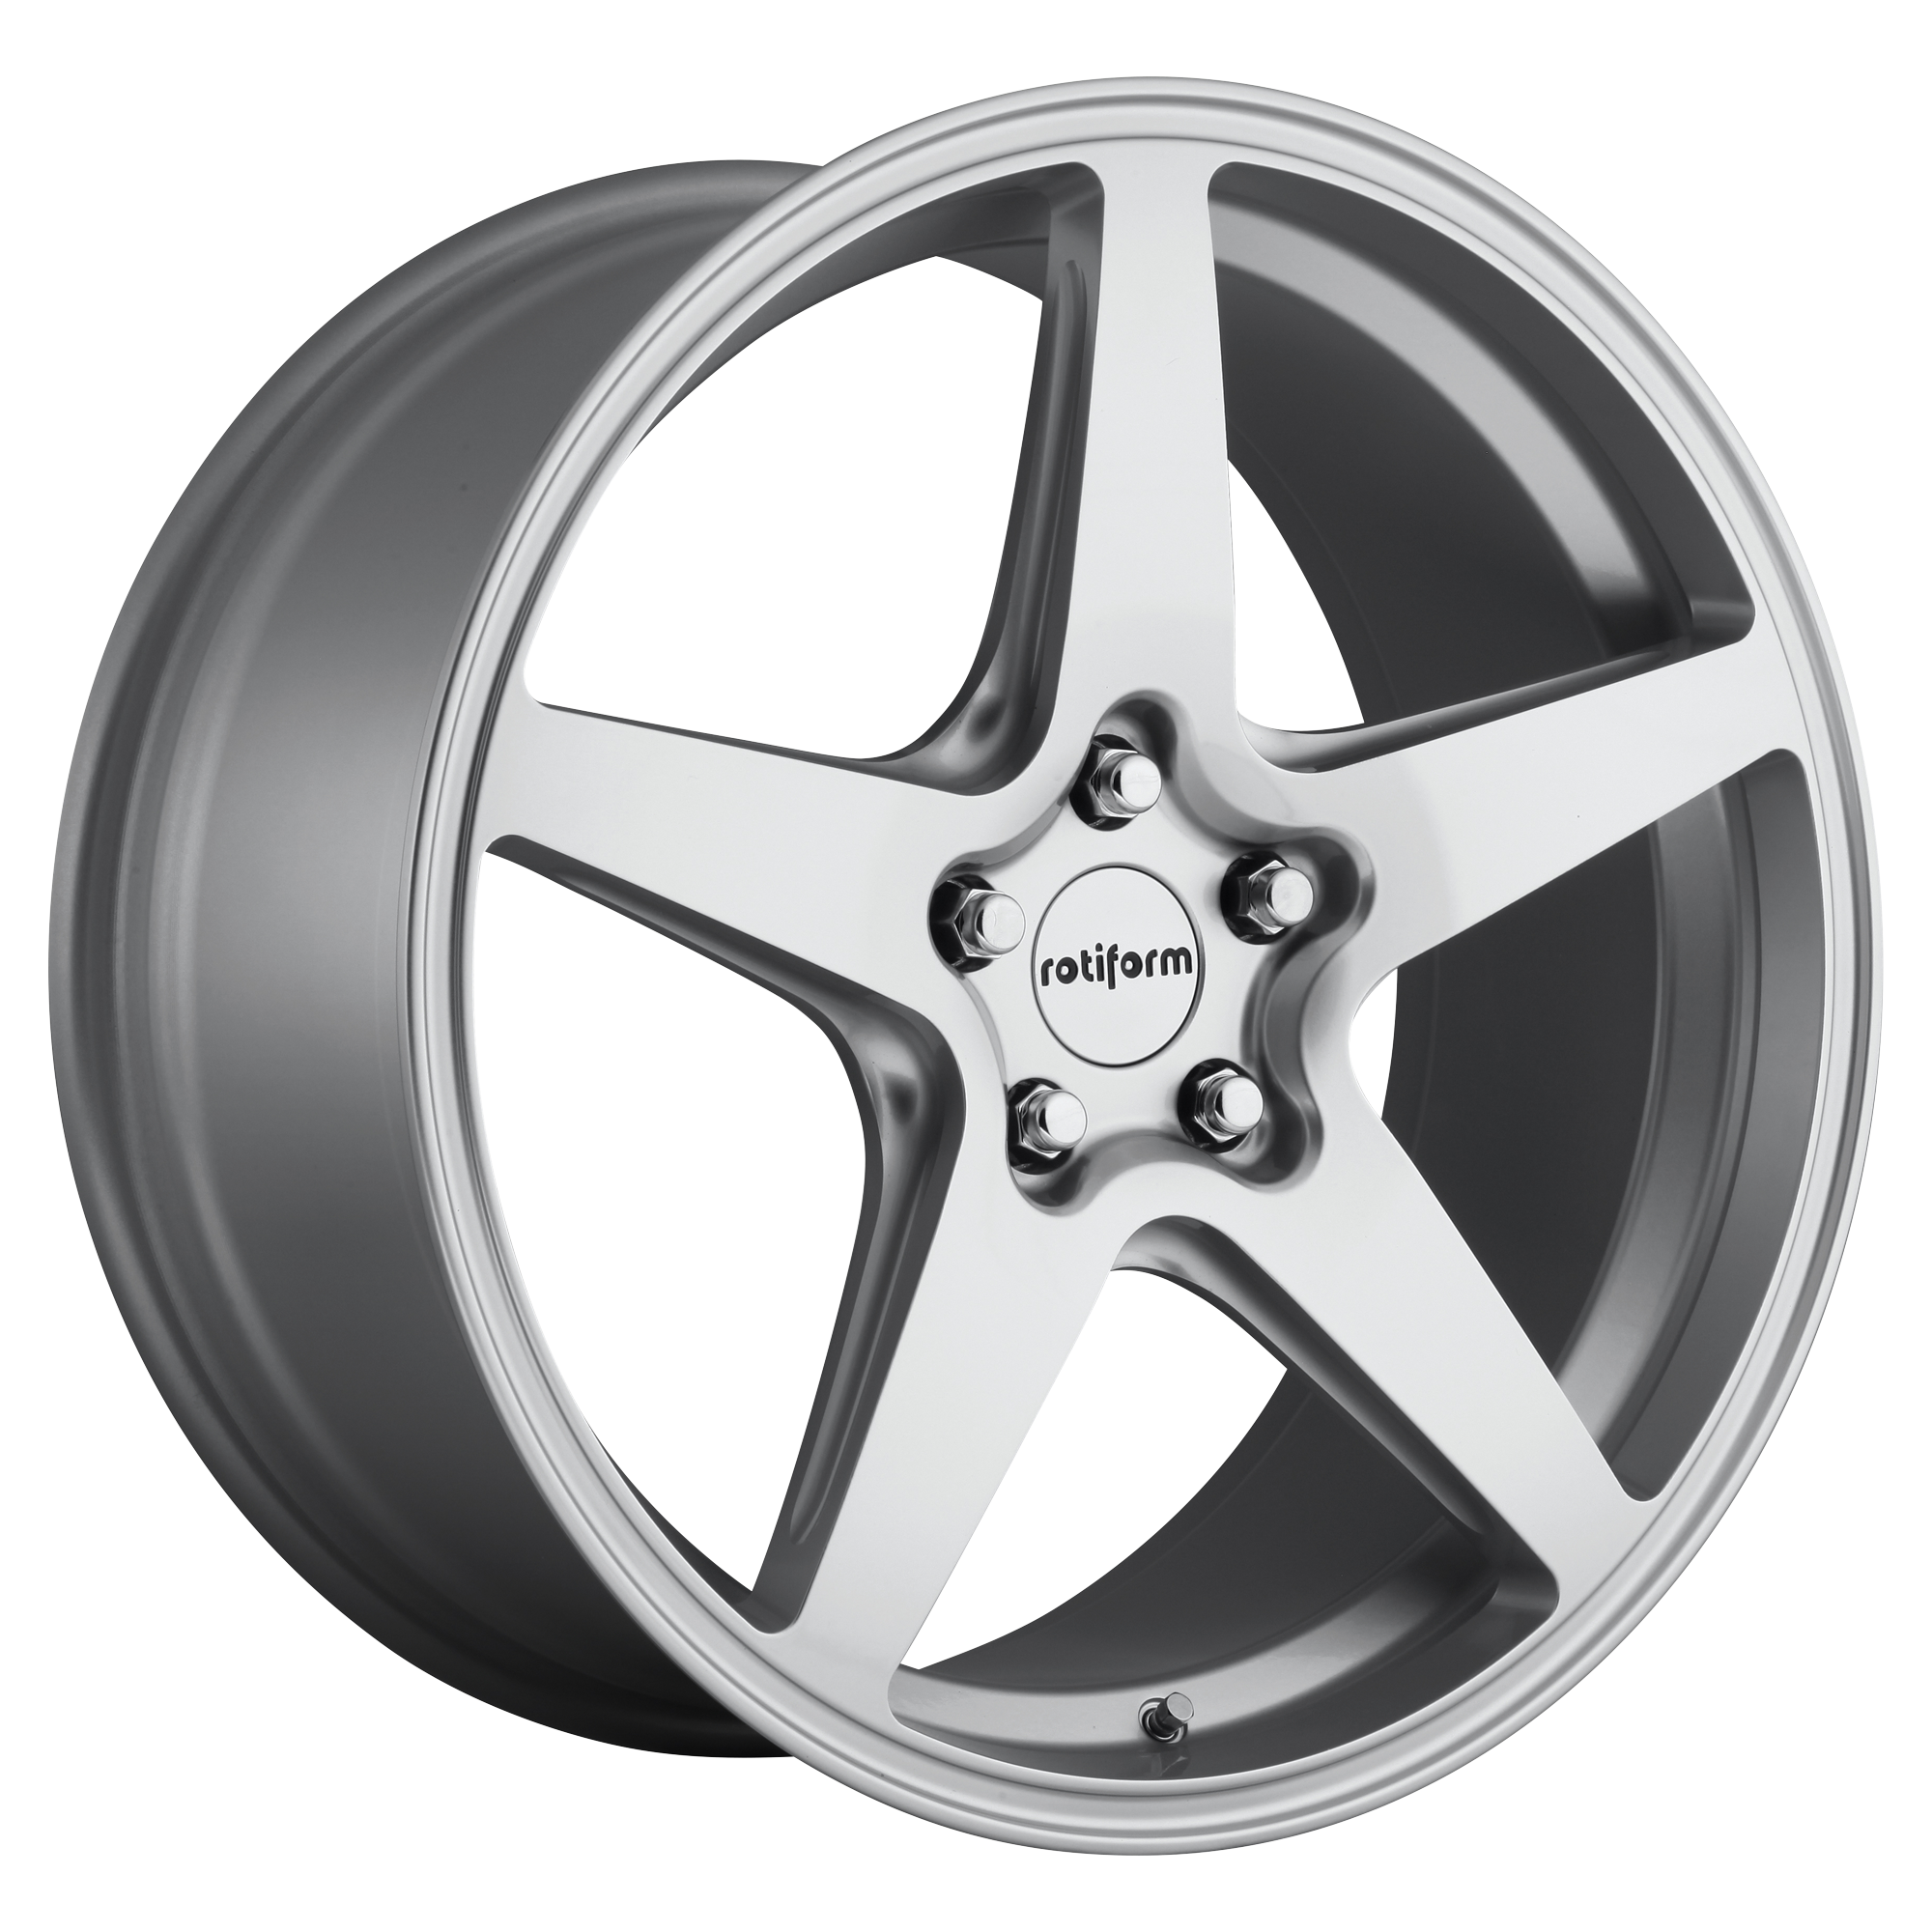 WGR 18x8.5 5x112.00 GLOSS SILVER (45 mm) - Tires and Engine Performance